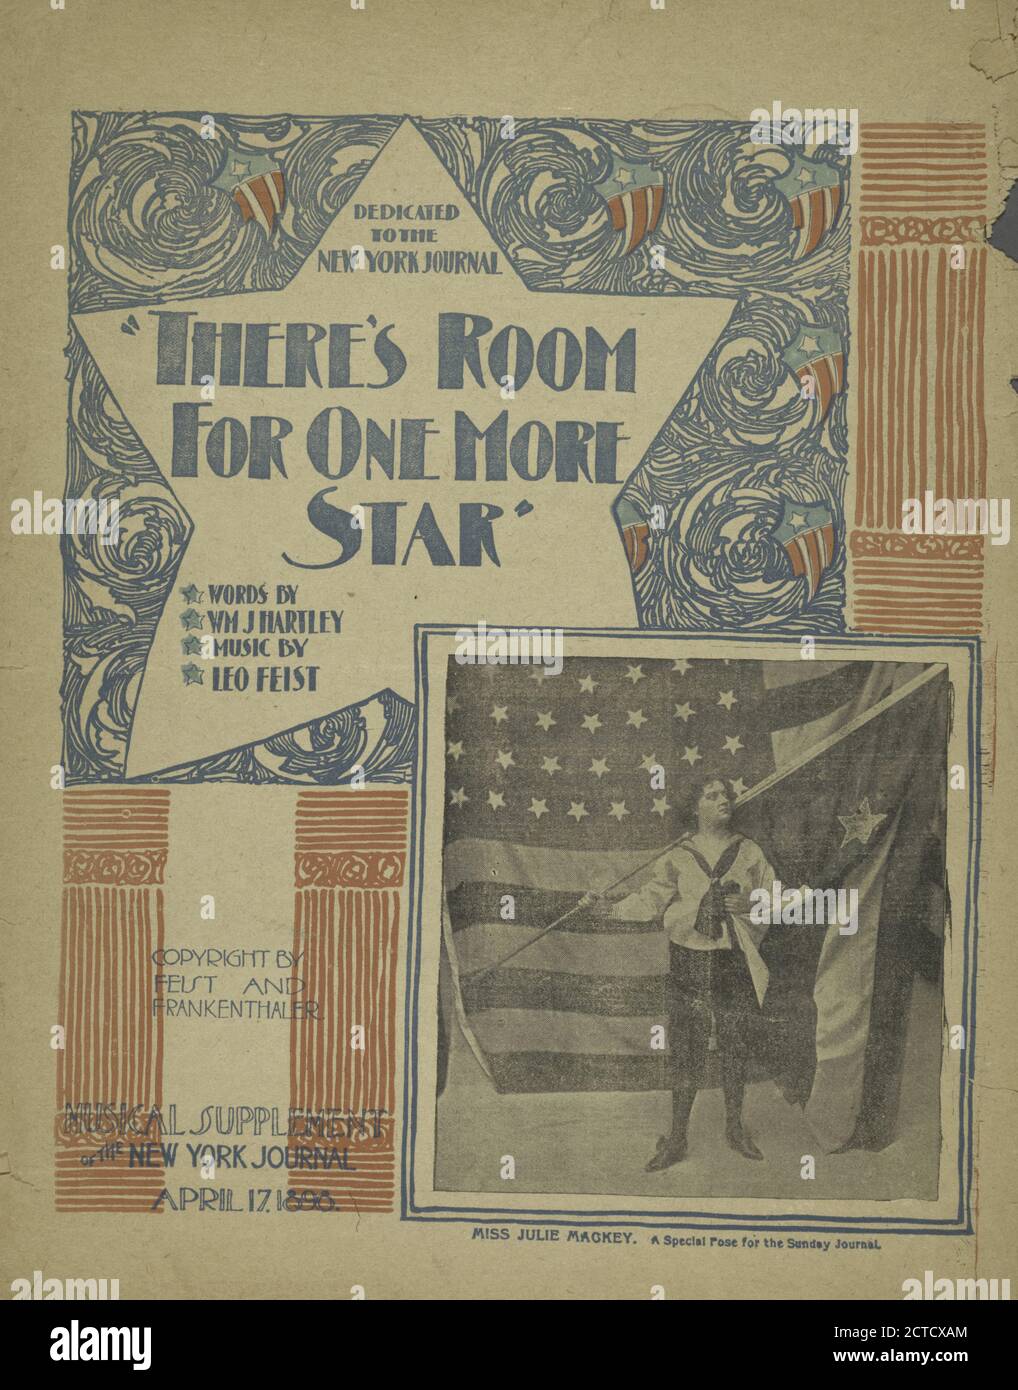 There's room for one more star, notated music, Scores, 1898 - 1898, Hartley, Wm. J., Feist, Leo (1869-1930 Stock Photo